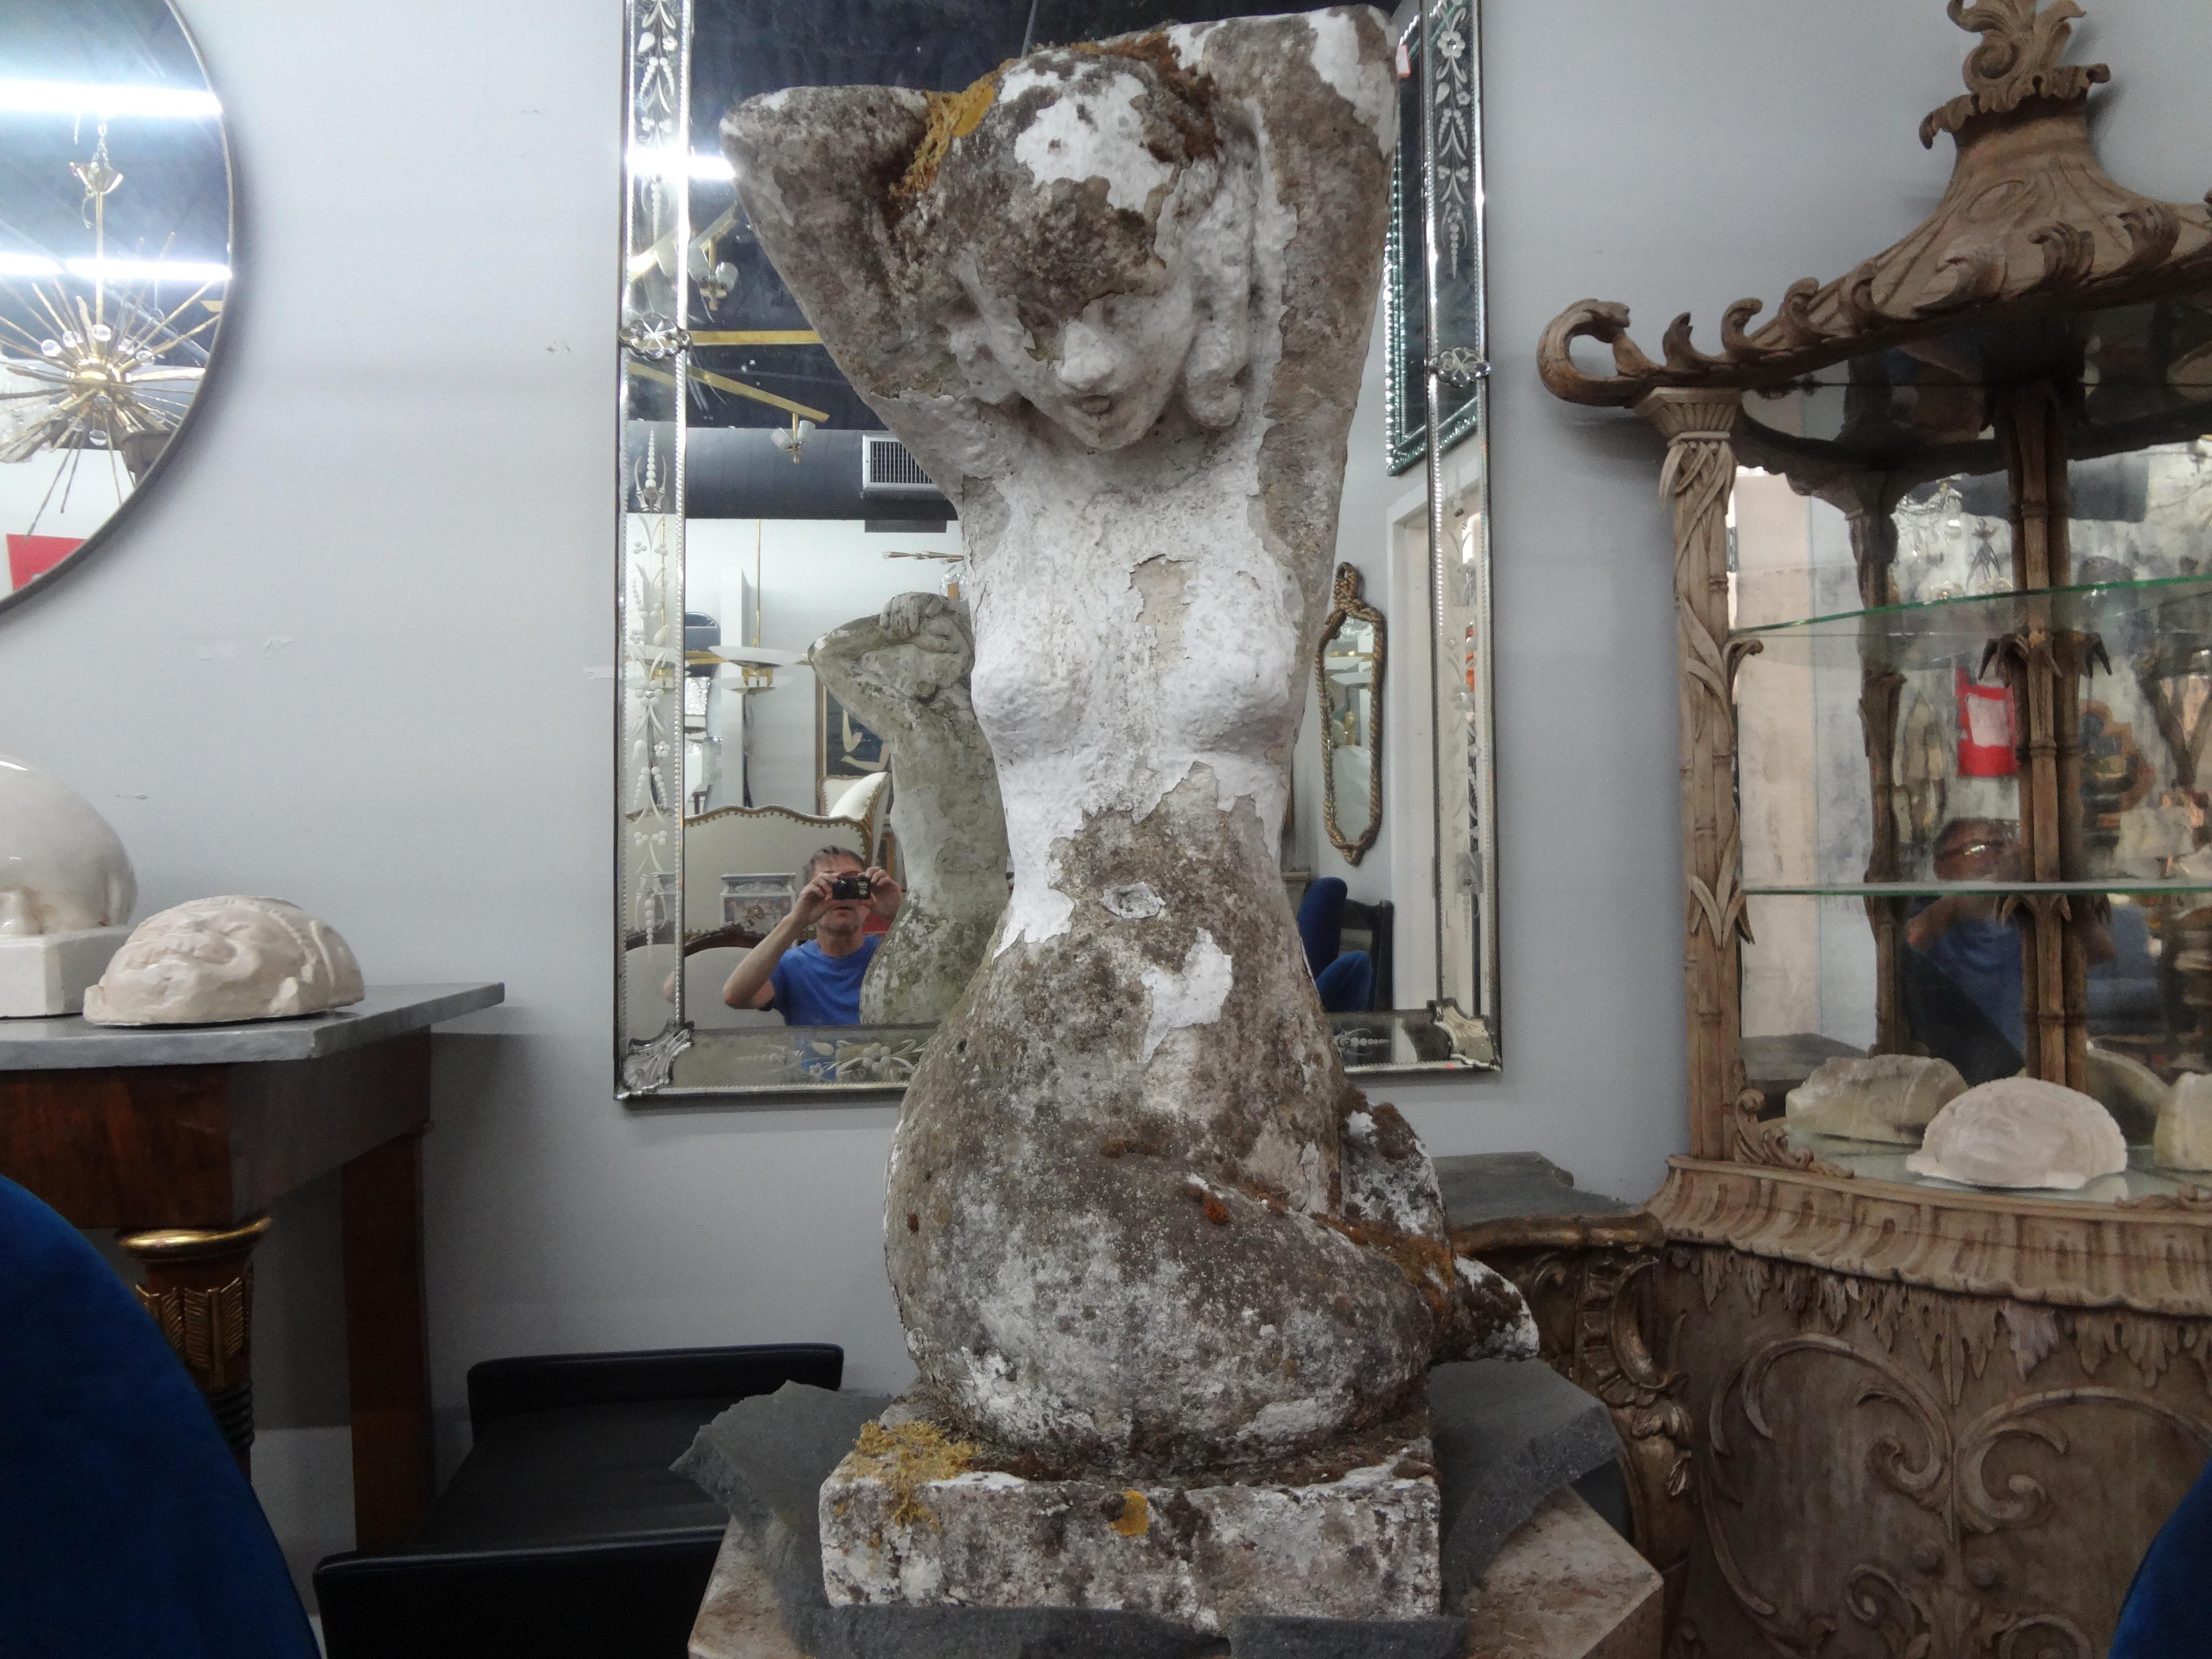 French Garden Statue Of A Mermaid.
This stunning French mermaid garden statue or garden ornament is executed in cement with moss and dates to the 1920's.
Beautiful placed on a pedestal, in a garden or a pond.
Quite unusual statement garden piece!